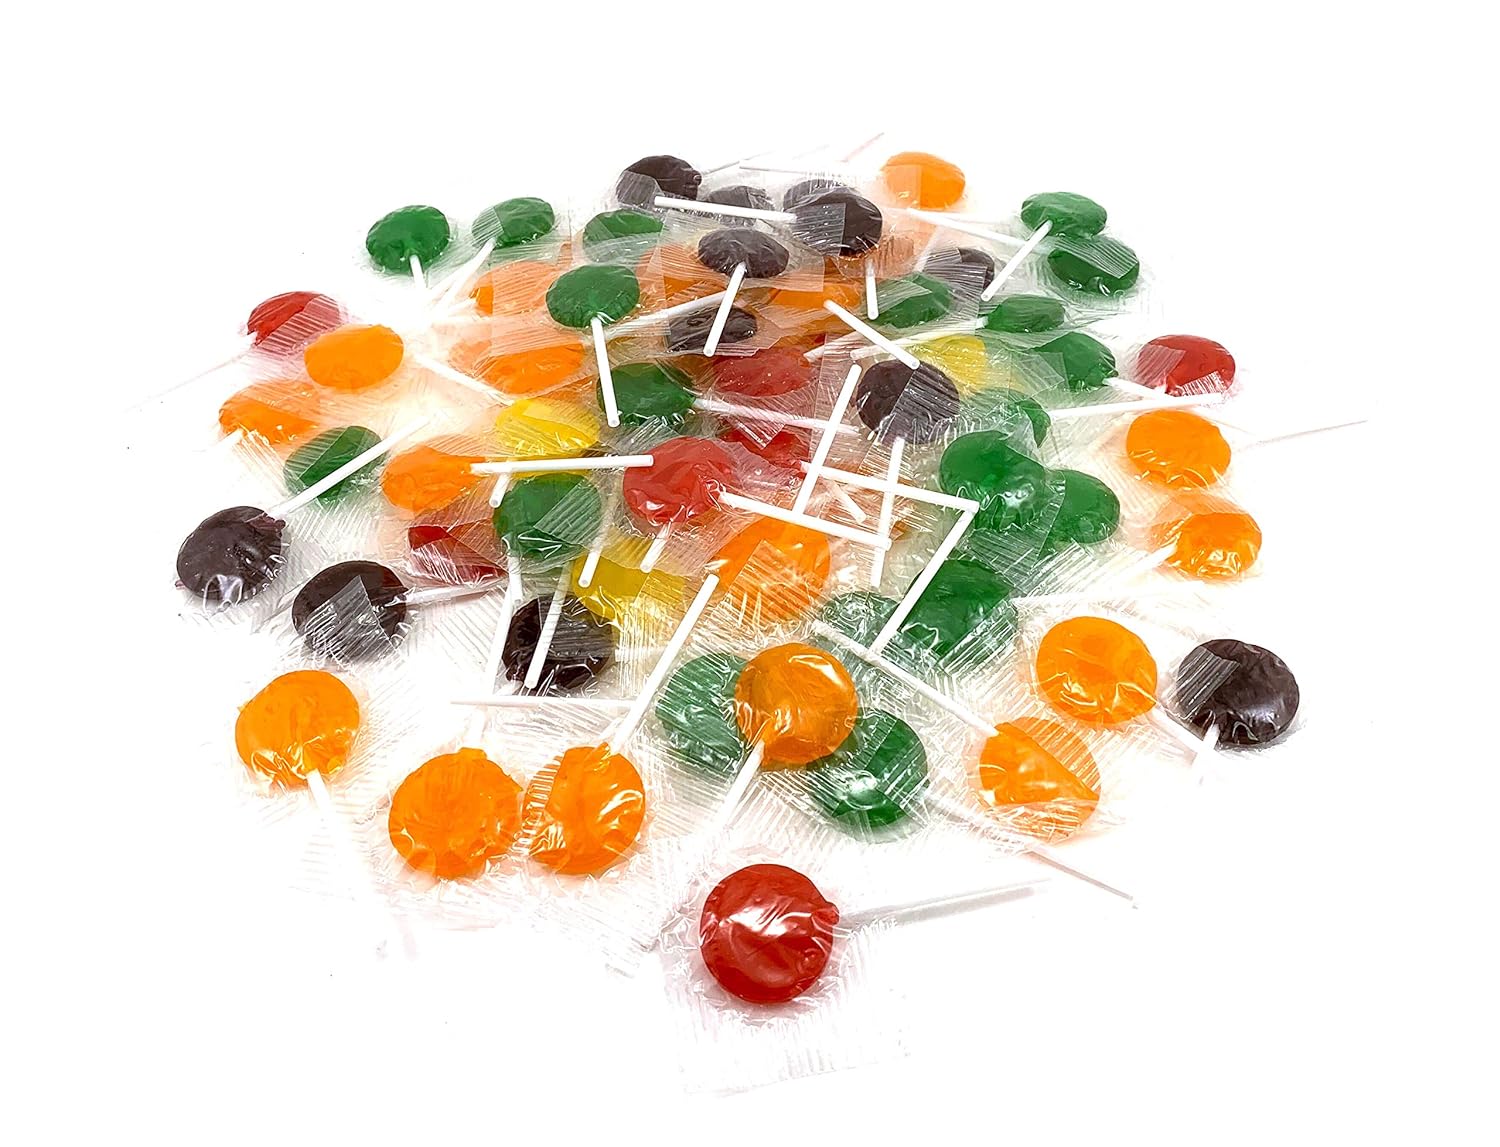  LaetaFood Lollipops Assorted Fruit Flavor Hard Candy Suckers, 80 Count (2 Pound Box)